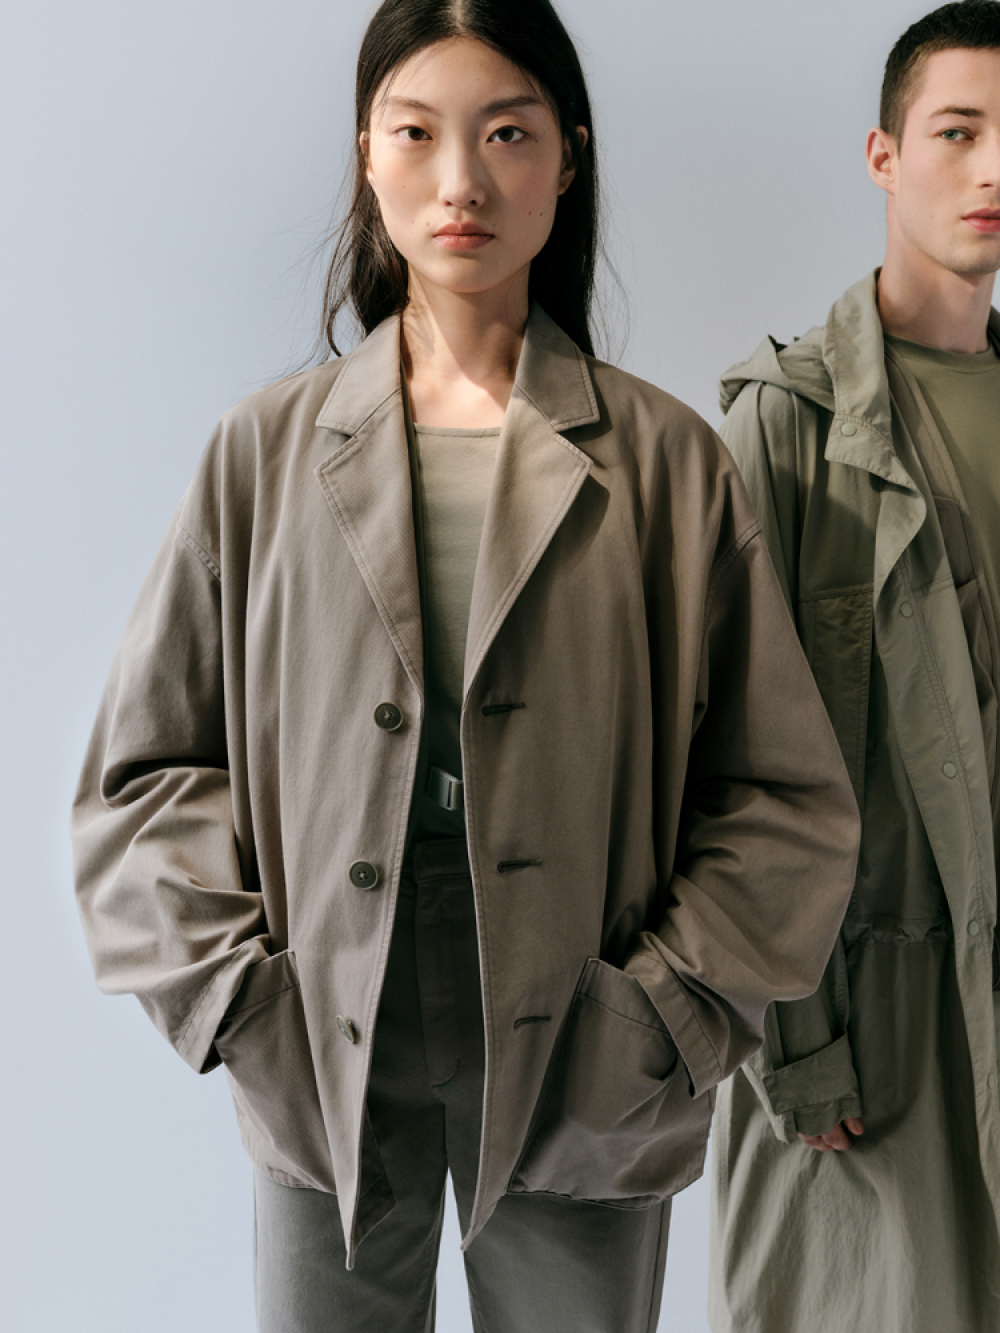 Stylish Terracross Jacket and Innerwear Concept for UNIQLO - Tuvie